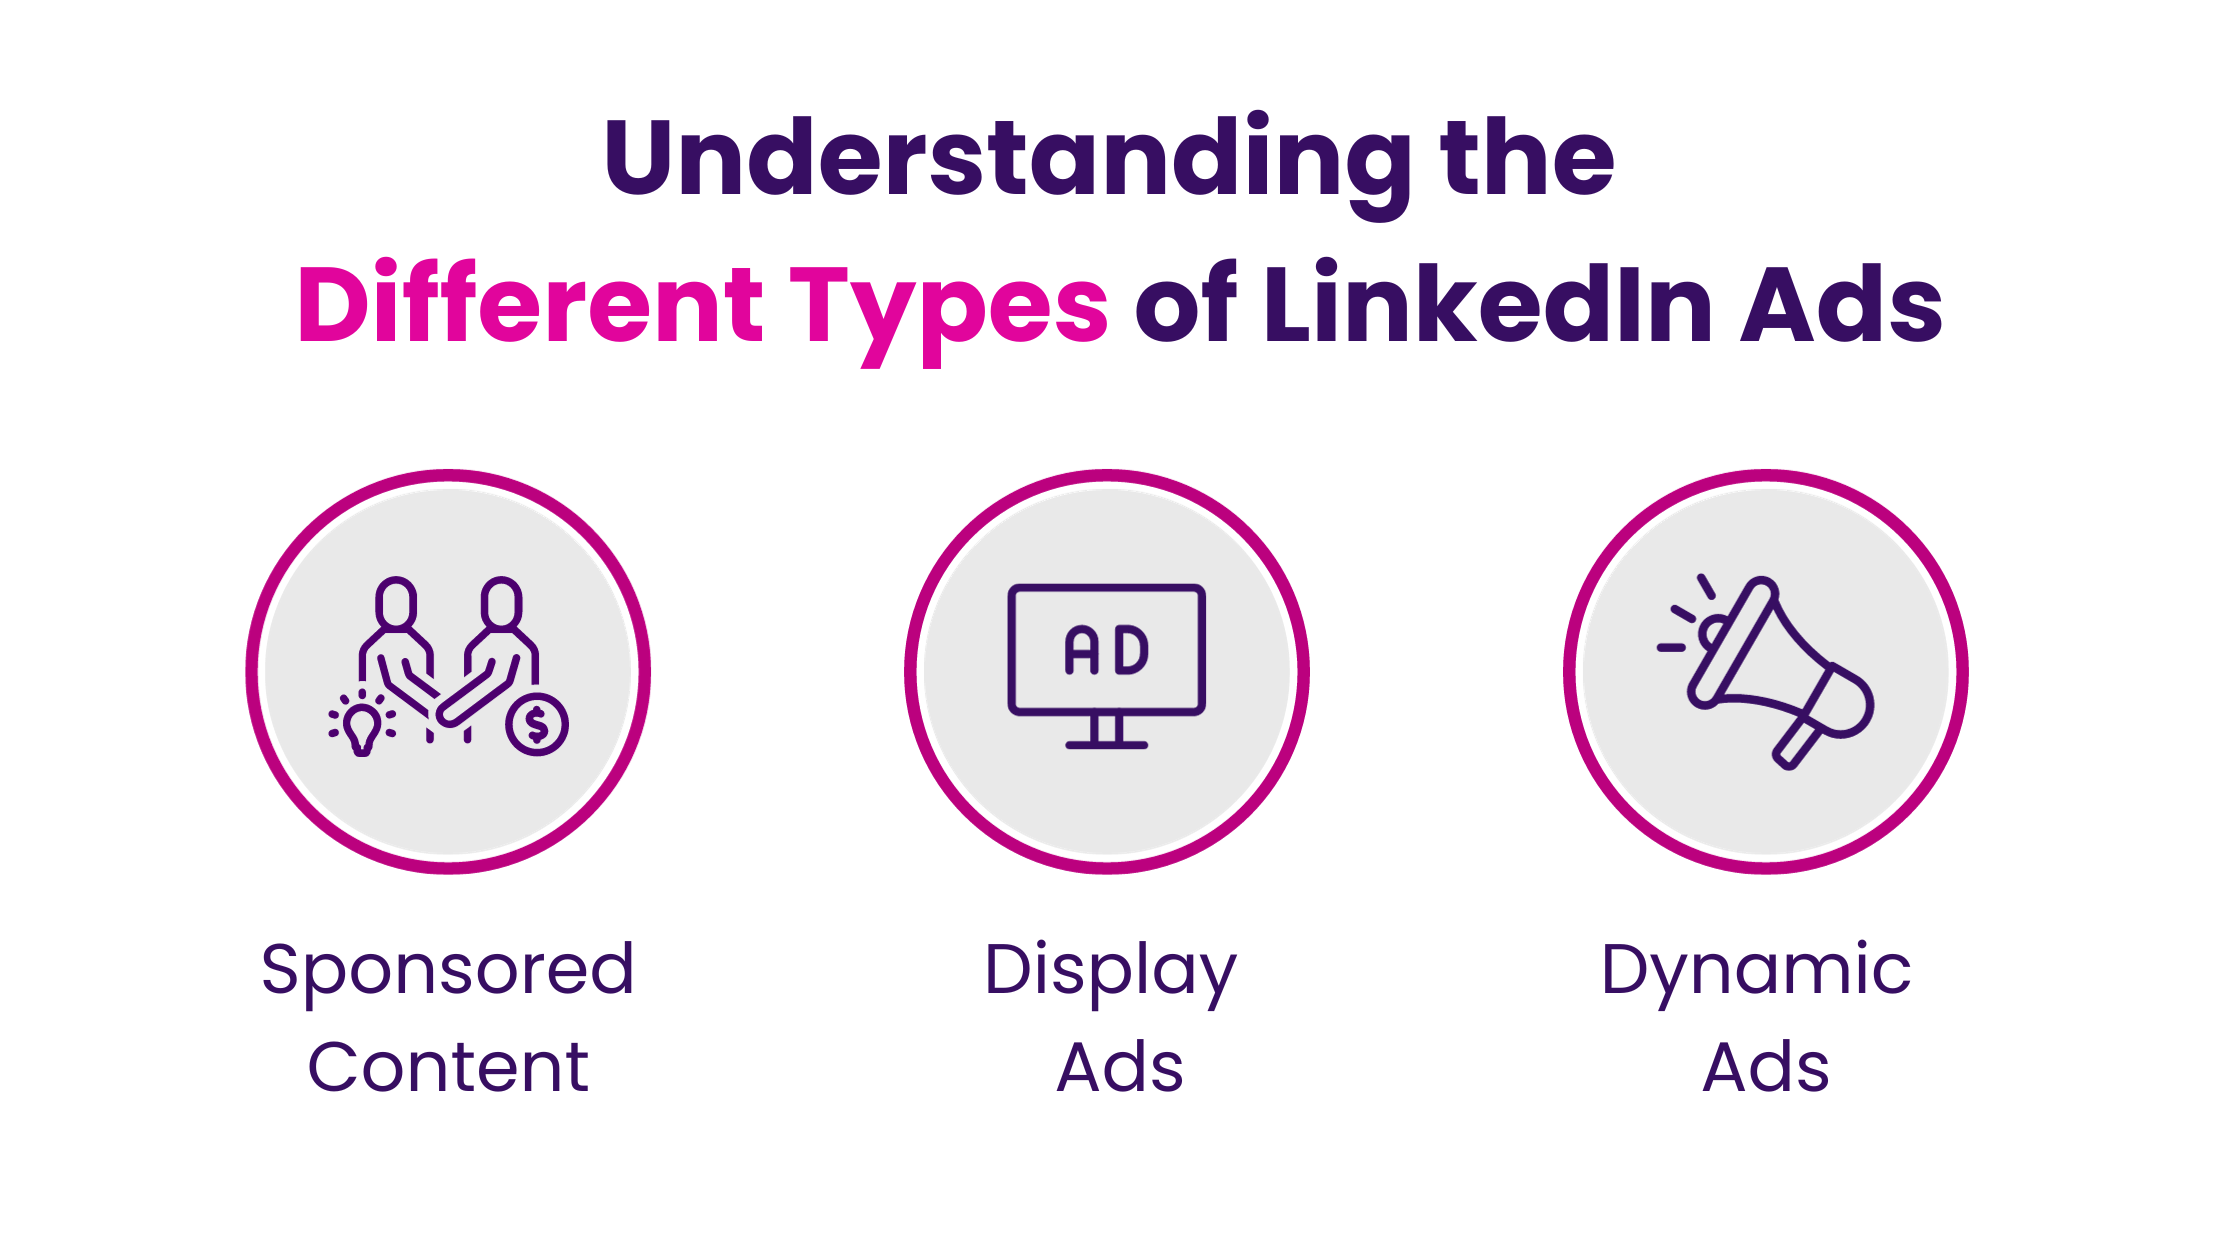 Understanding the Different Types of LinkedIn Ads